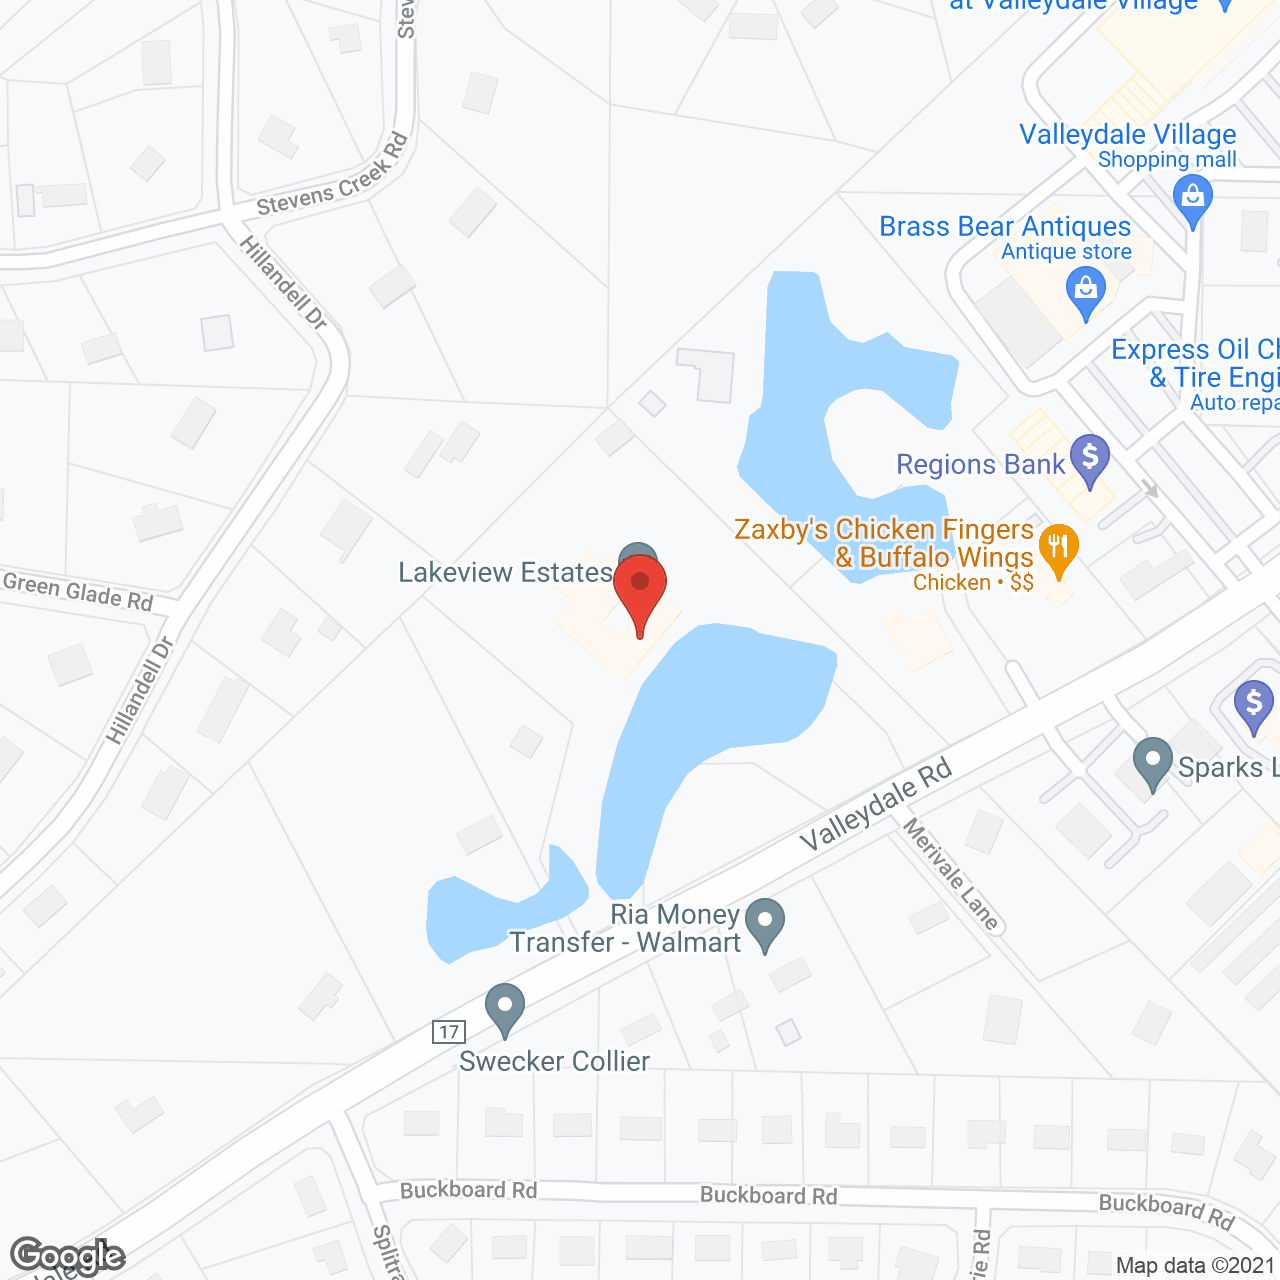 Lakeview Estates in google map